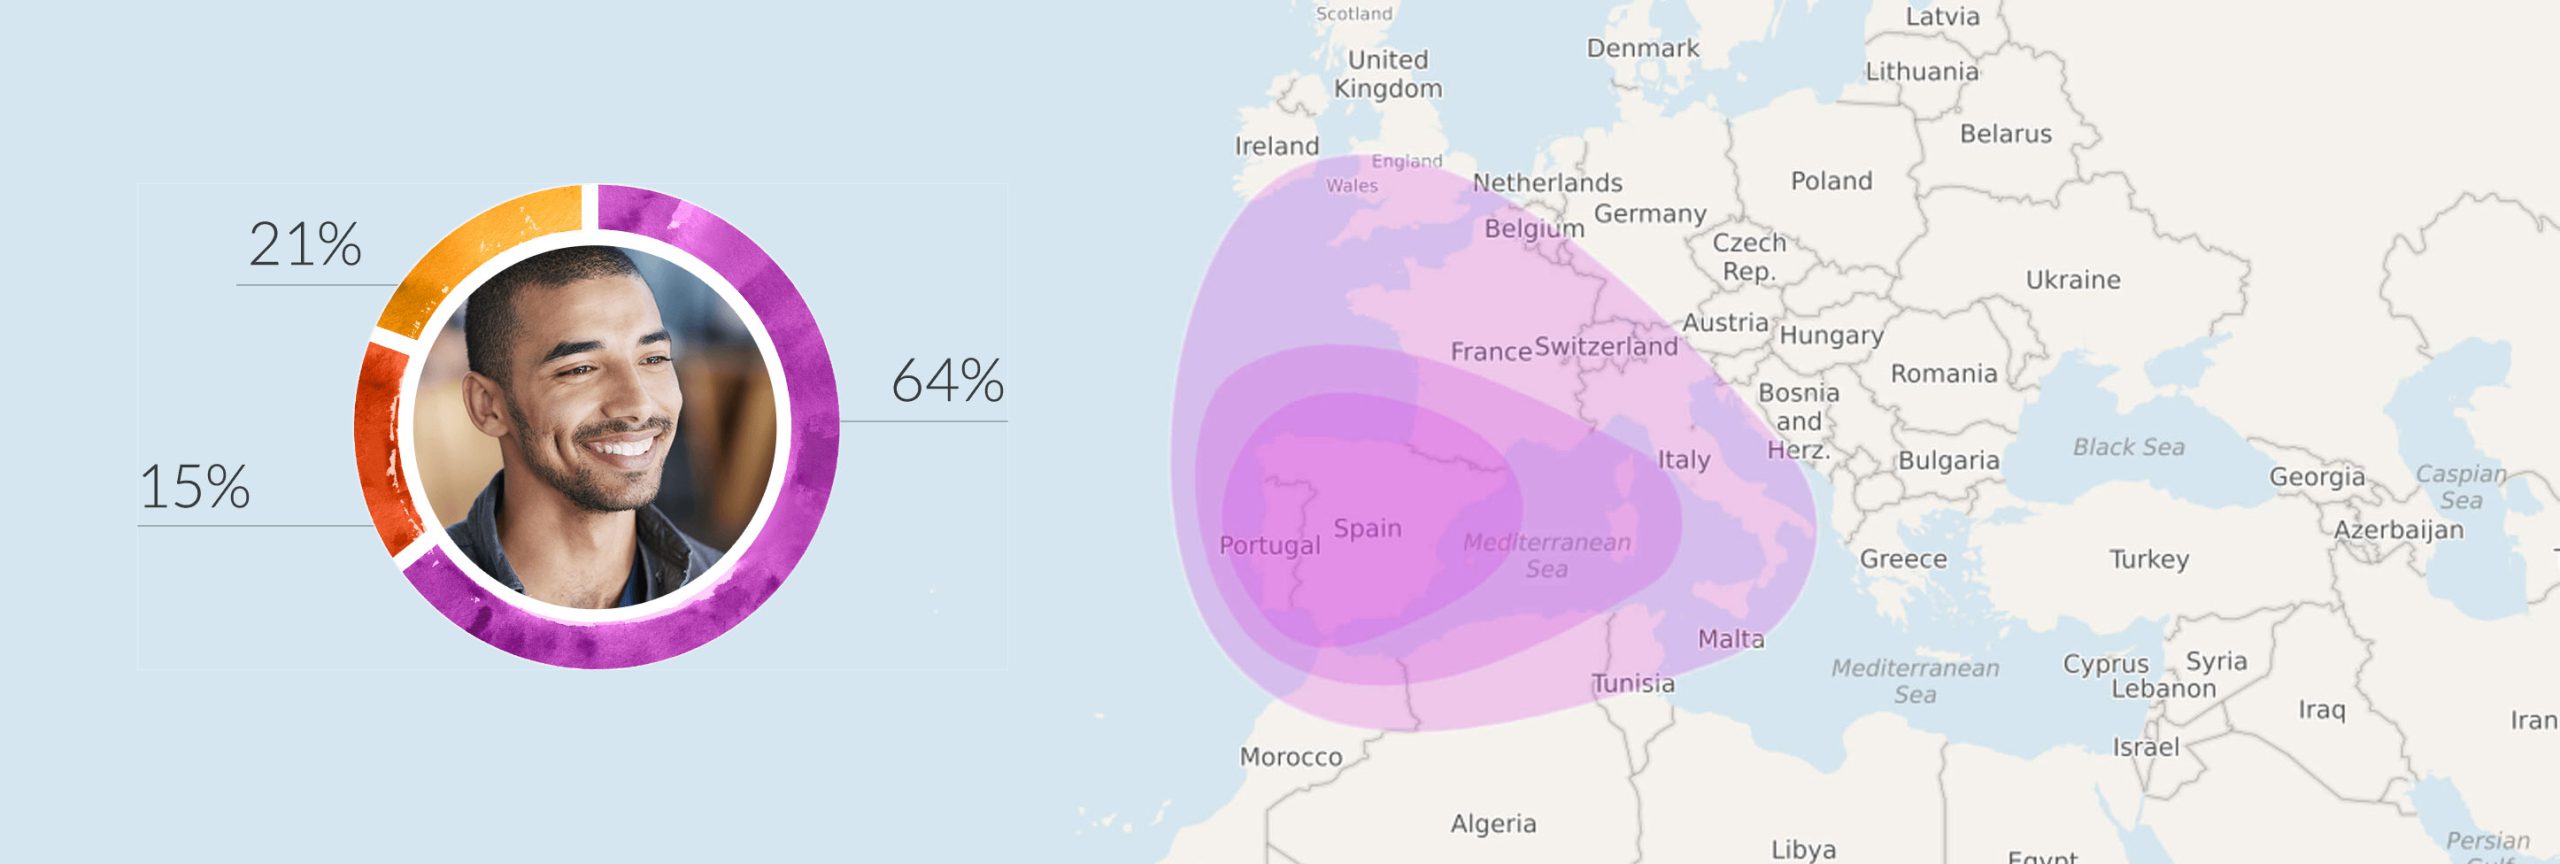 MyHeritage results